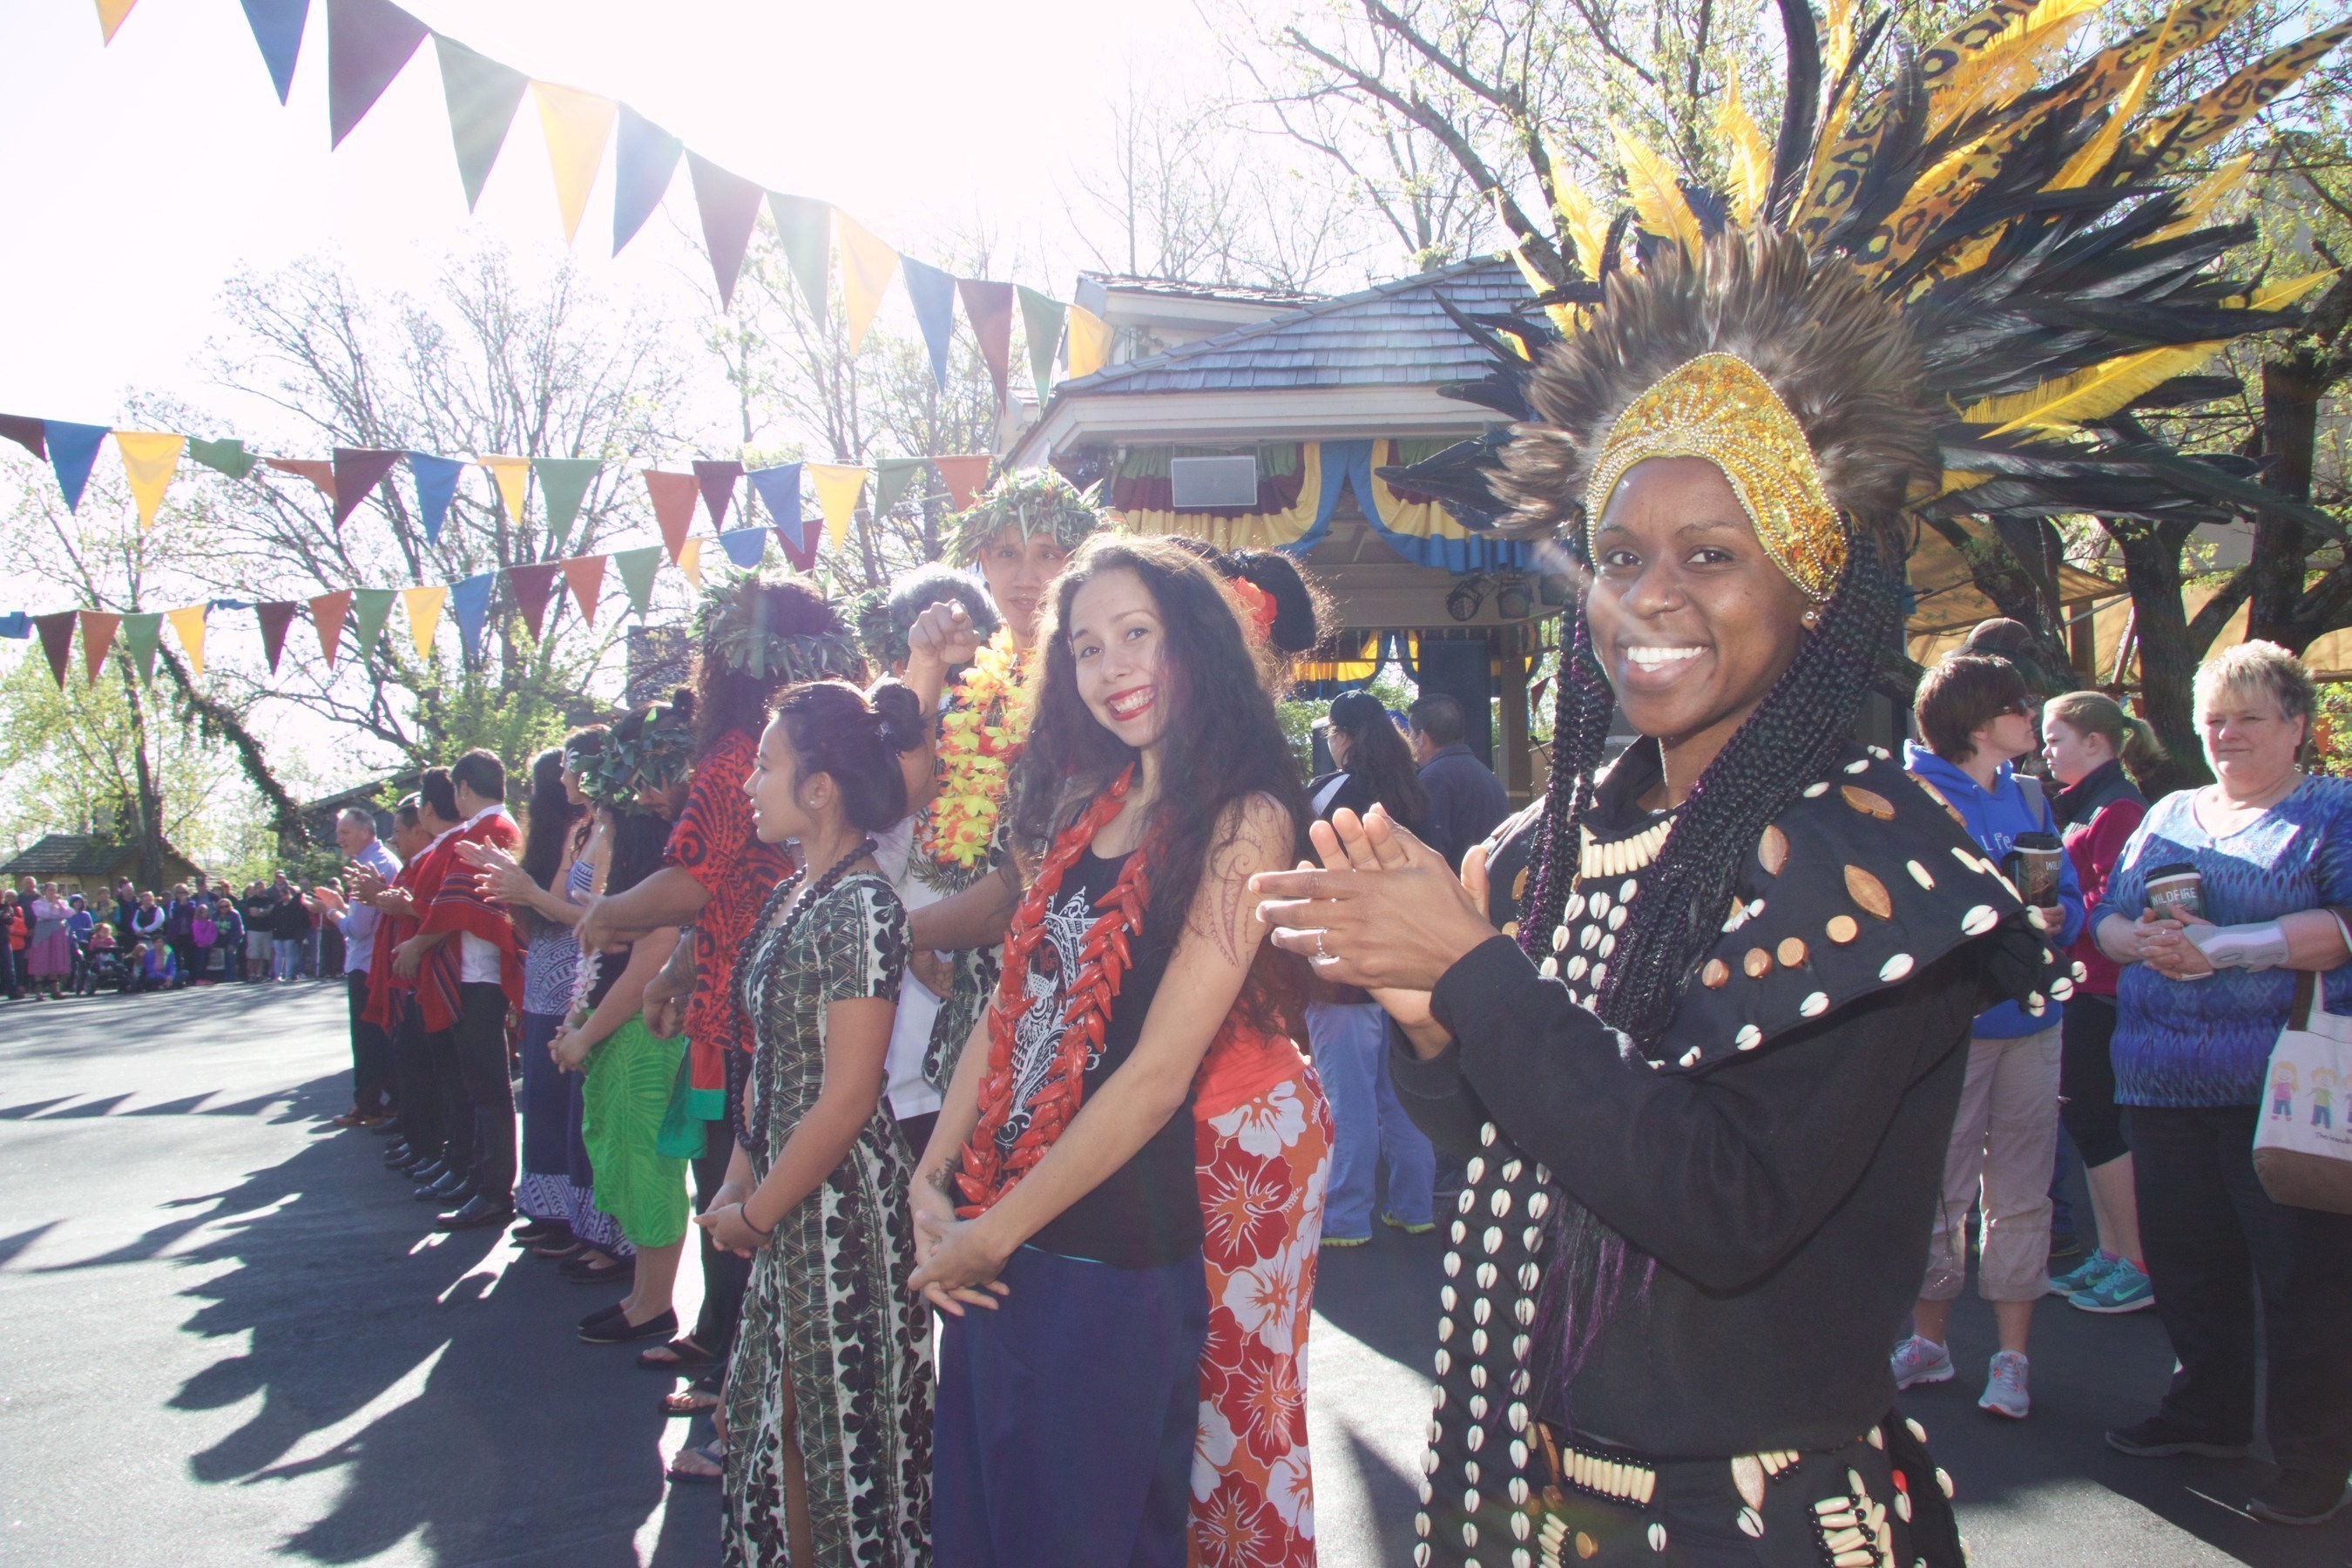 Performers from Africa and Tahiti are among those featured at Silver Dollar City's World-Fest in Branson, Missouri. World-Fest's Grand Finale season runs through May 1.